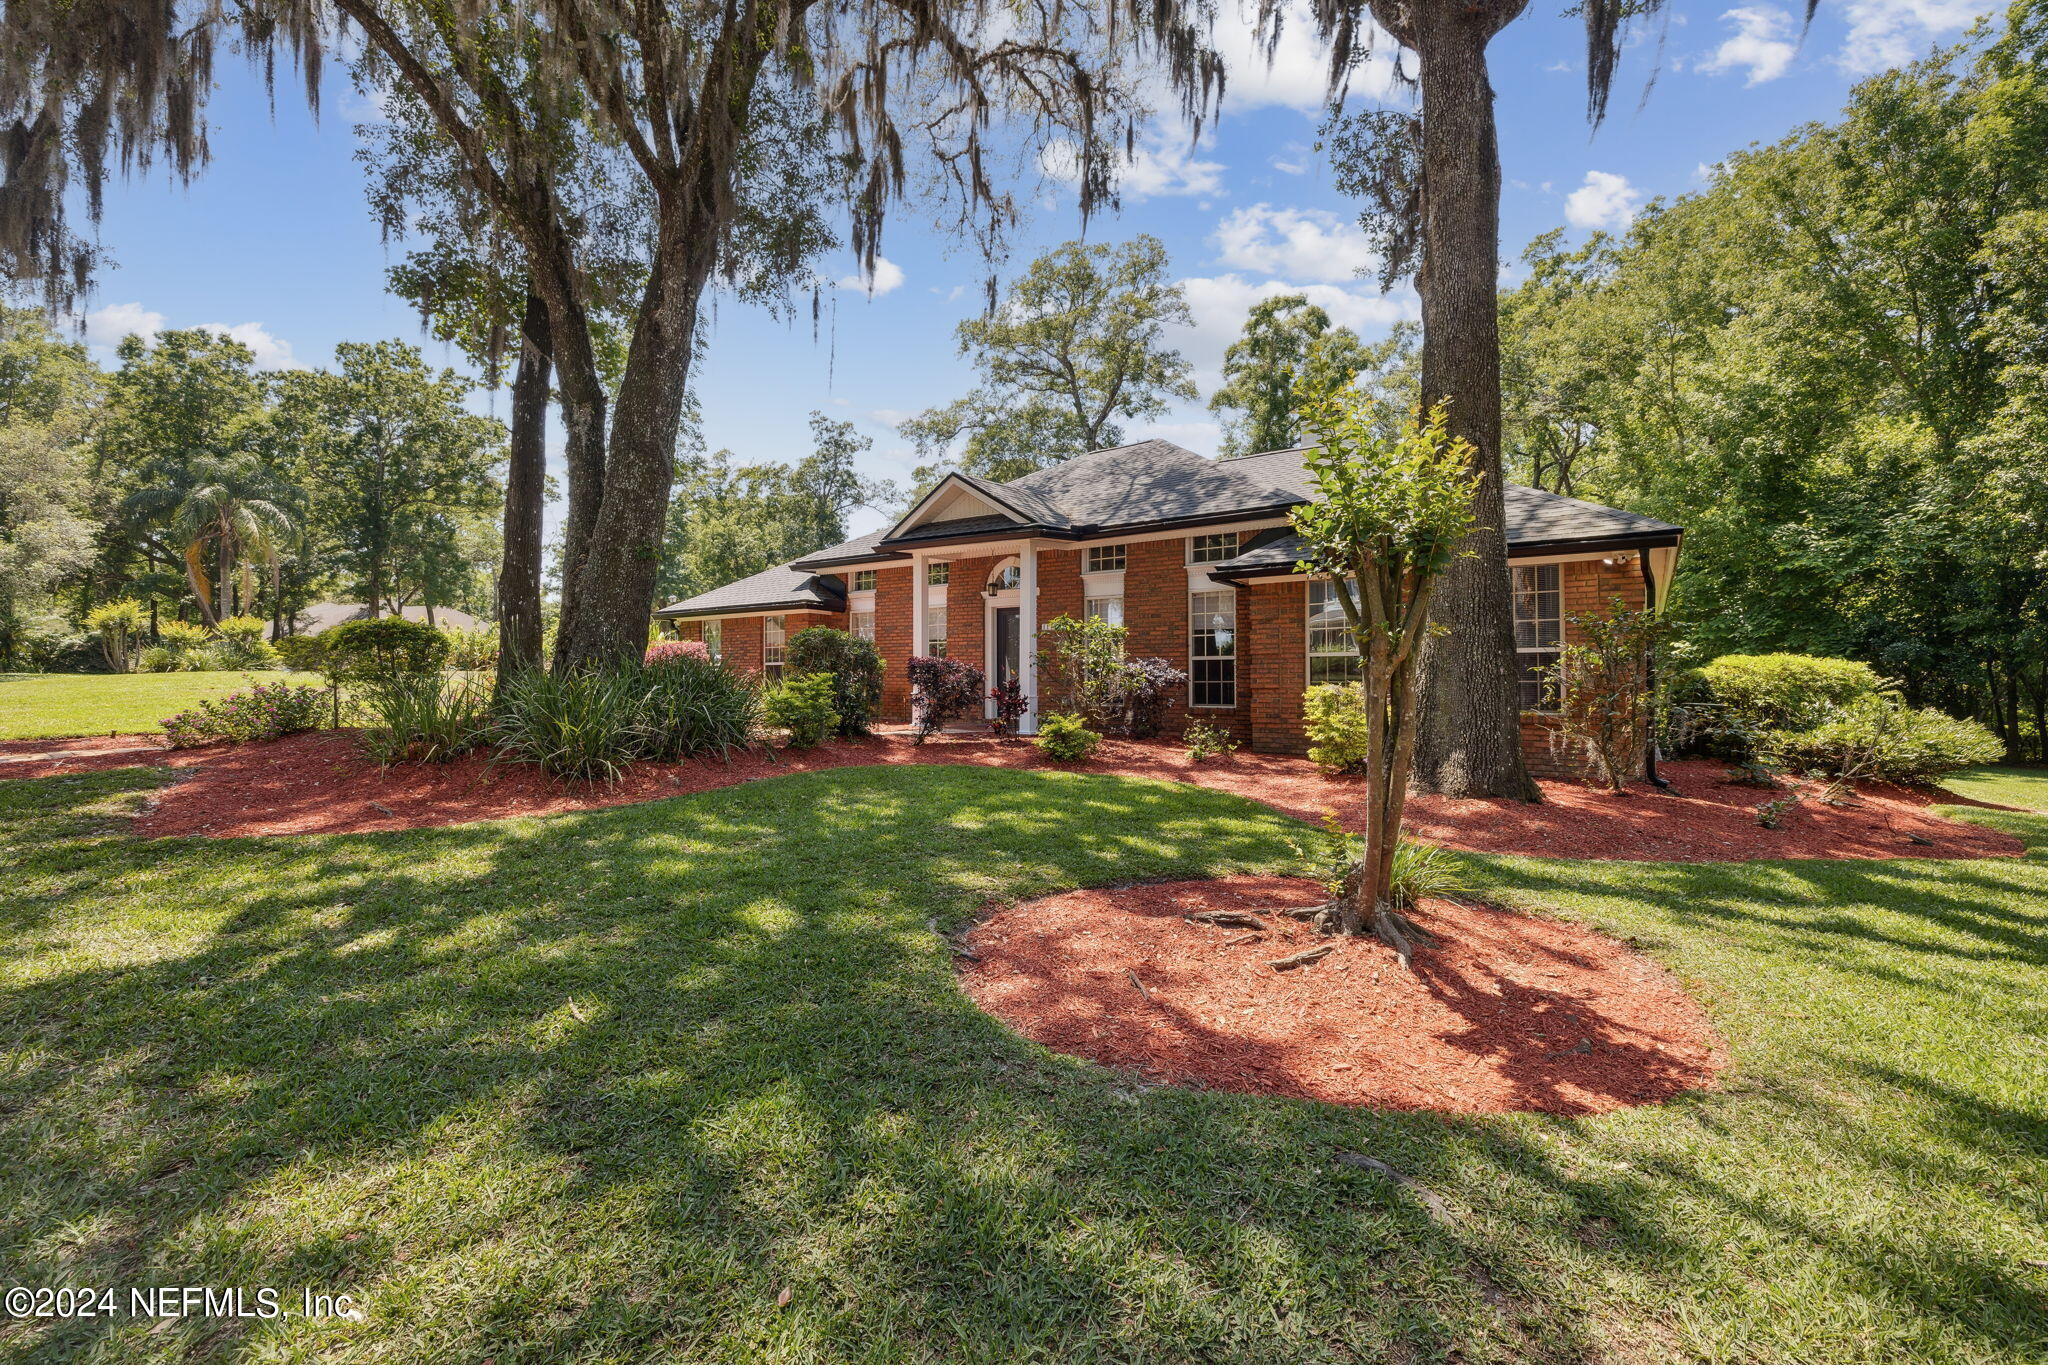 Jacksonville, FL home for sale located at 11750 Greenland Oaks Drive, Jacksonville, FL 32258